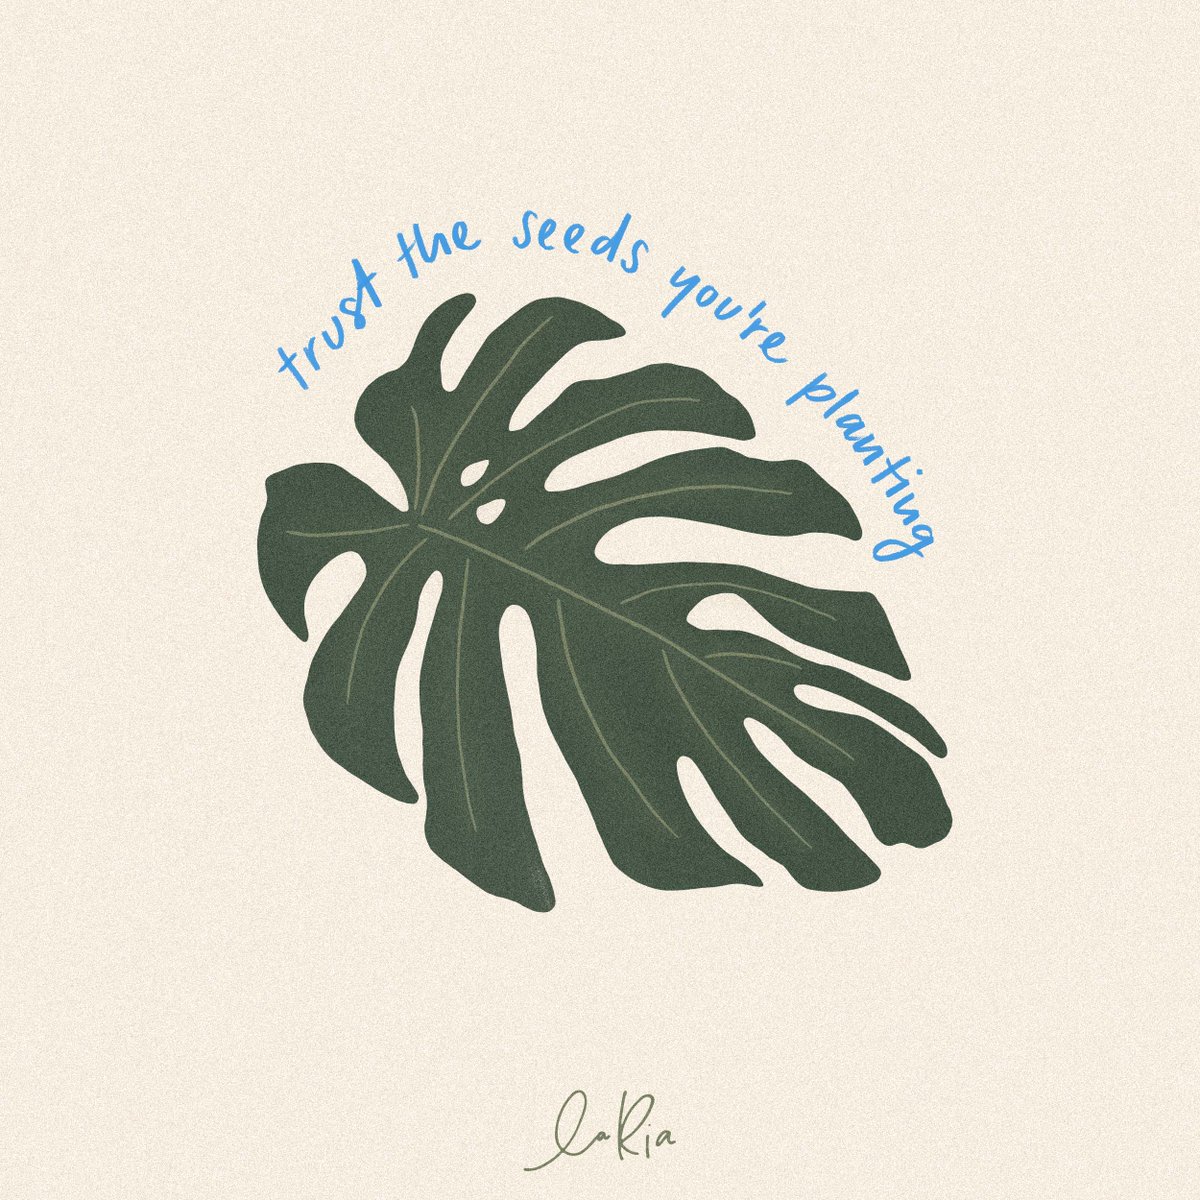 A reminder that following a dream, taking actions to achieve a goal or building a business takes time. It requires different conditions, just like a plant needs a certain environment. And that may take time, trust, endurance & hope. But it's worth it.🌱 #art #illustration #quote